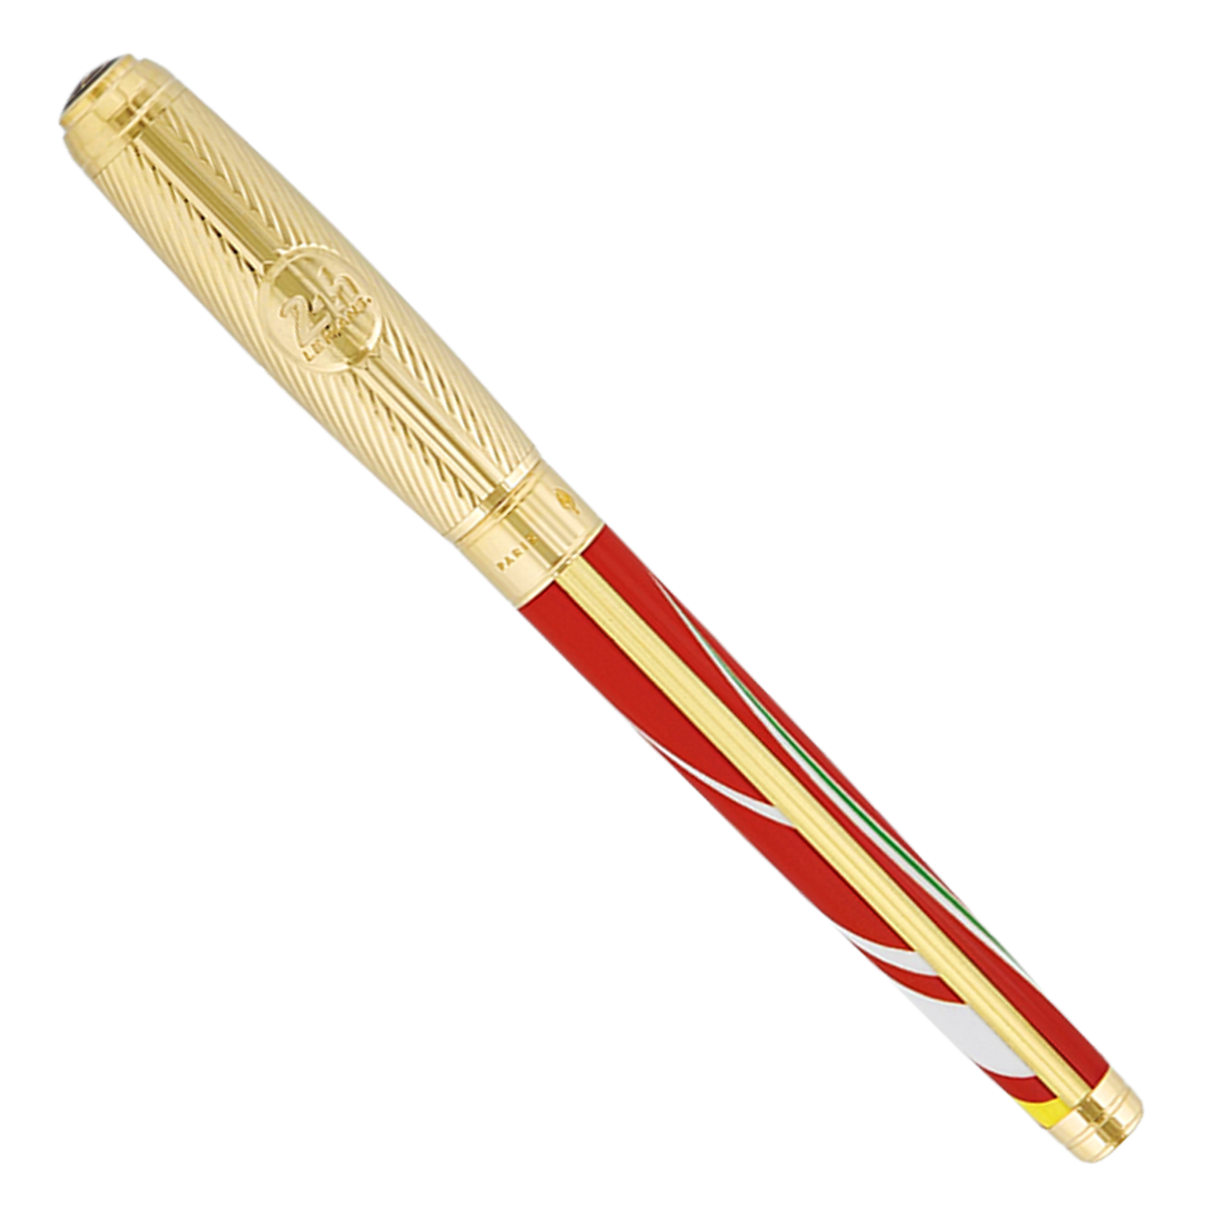 S.T. Dupont Line D Le Mans Red & Gold - Multifunction Pen - Fountain Pen/Rollerball